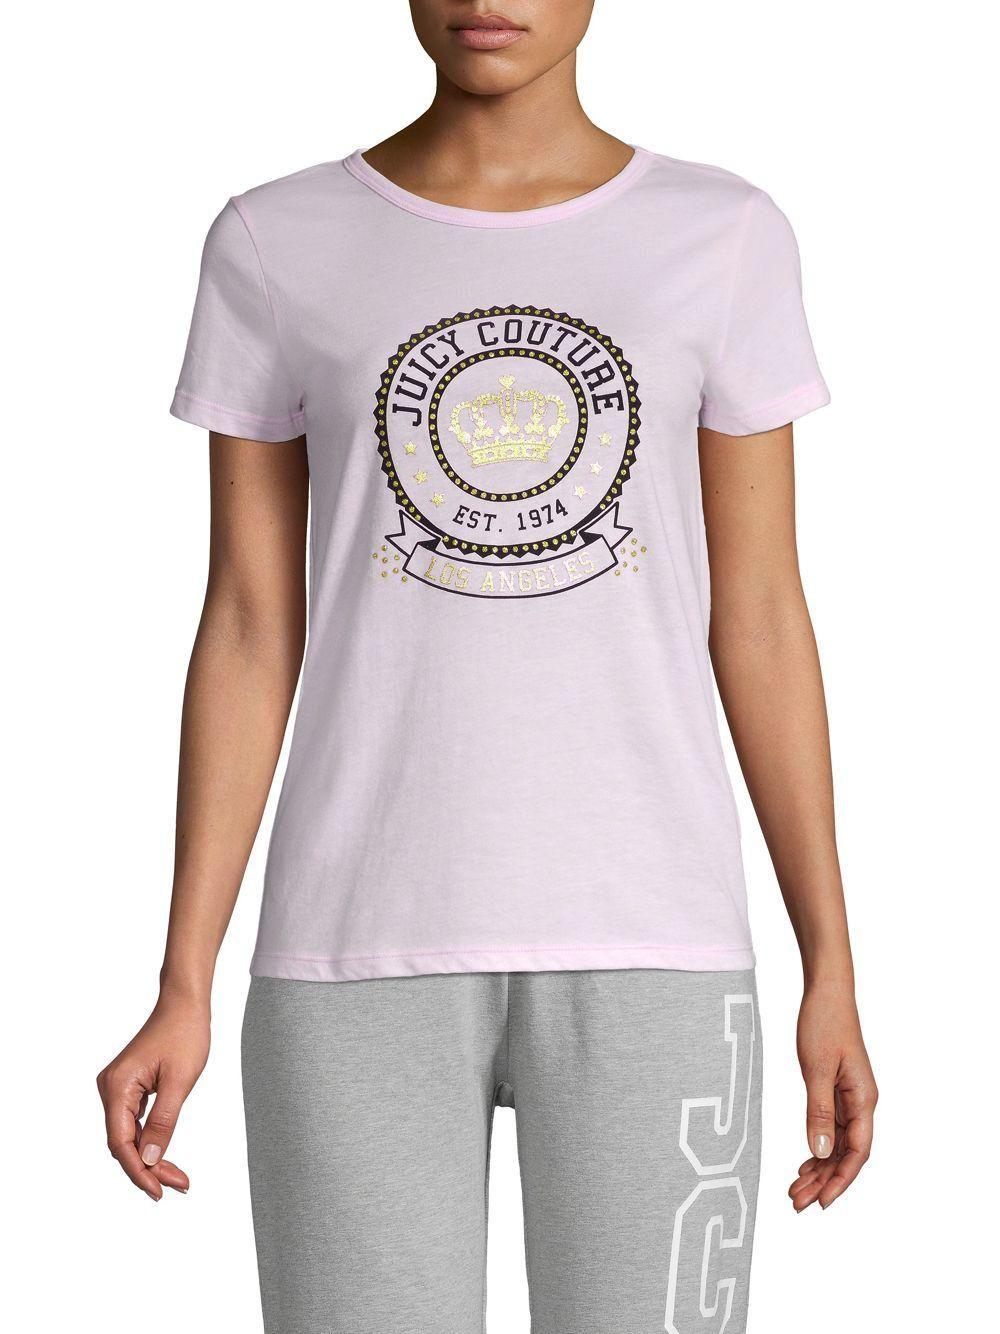 Juicy Couture Crown Logo - Juicy Couture Crown Logo Tee in Pink